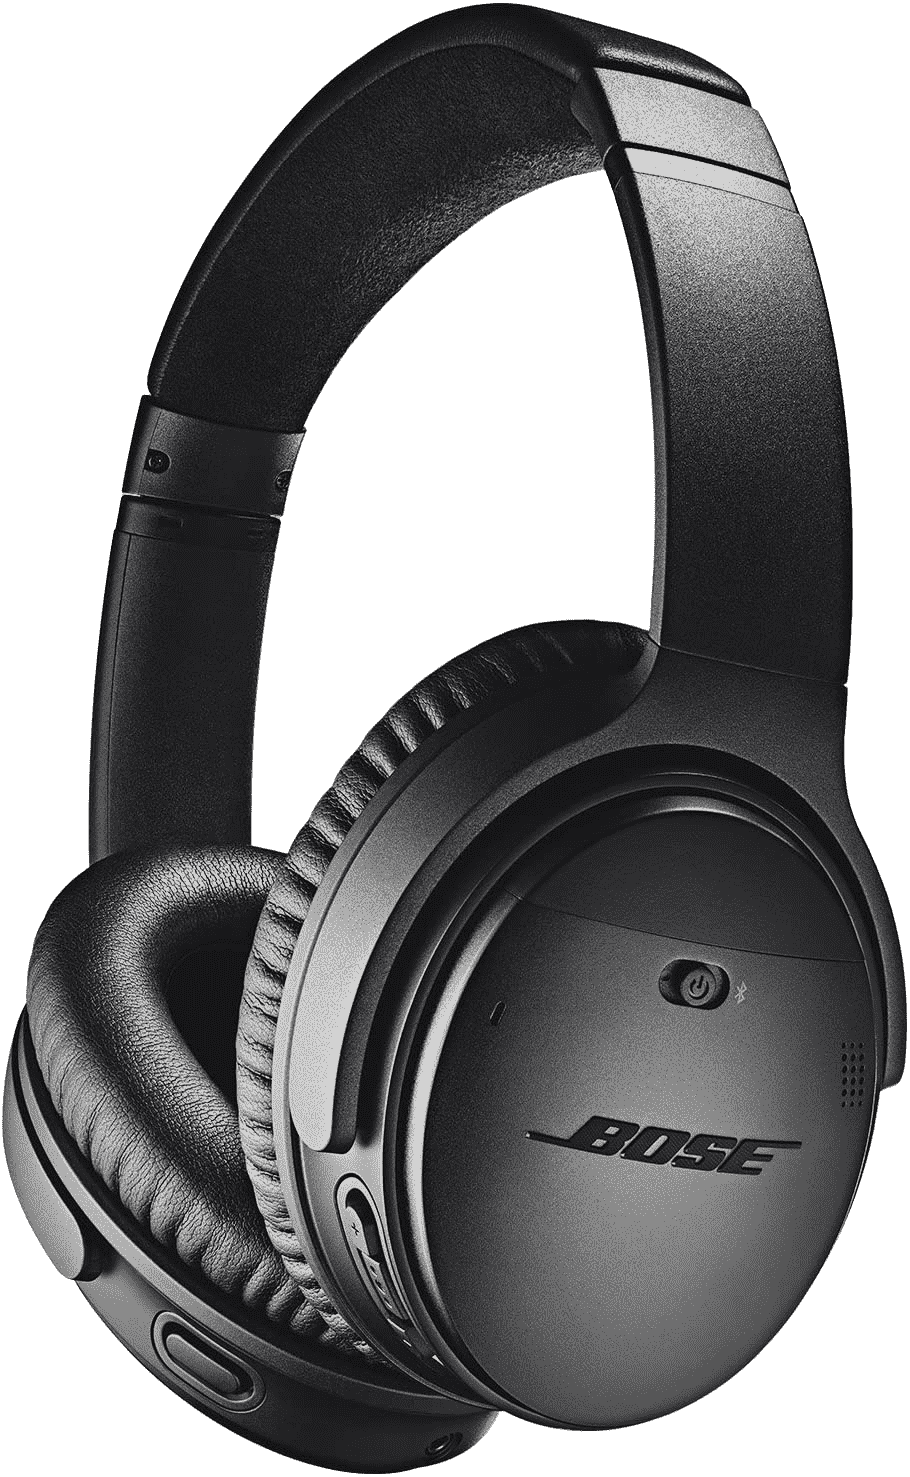 Bose Wireless Bluetooth Headphones travel accessories for frequent flyers